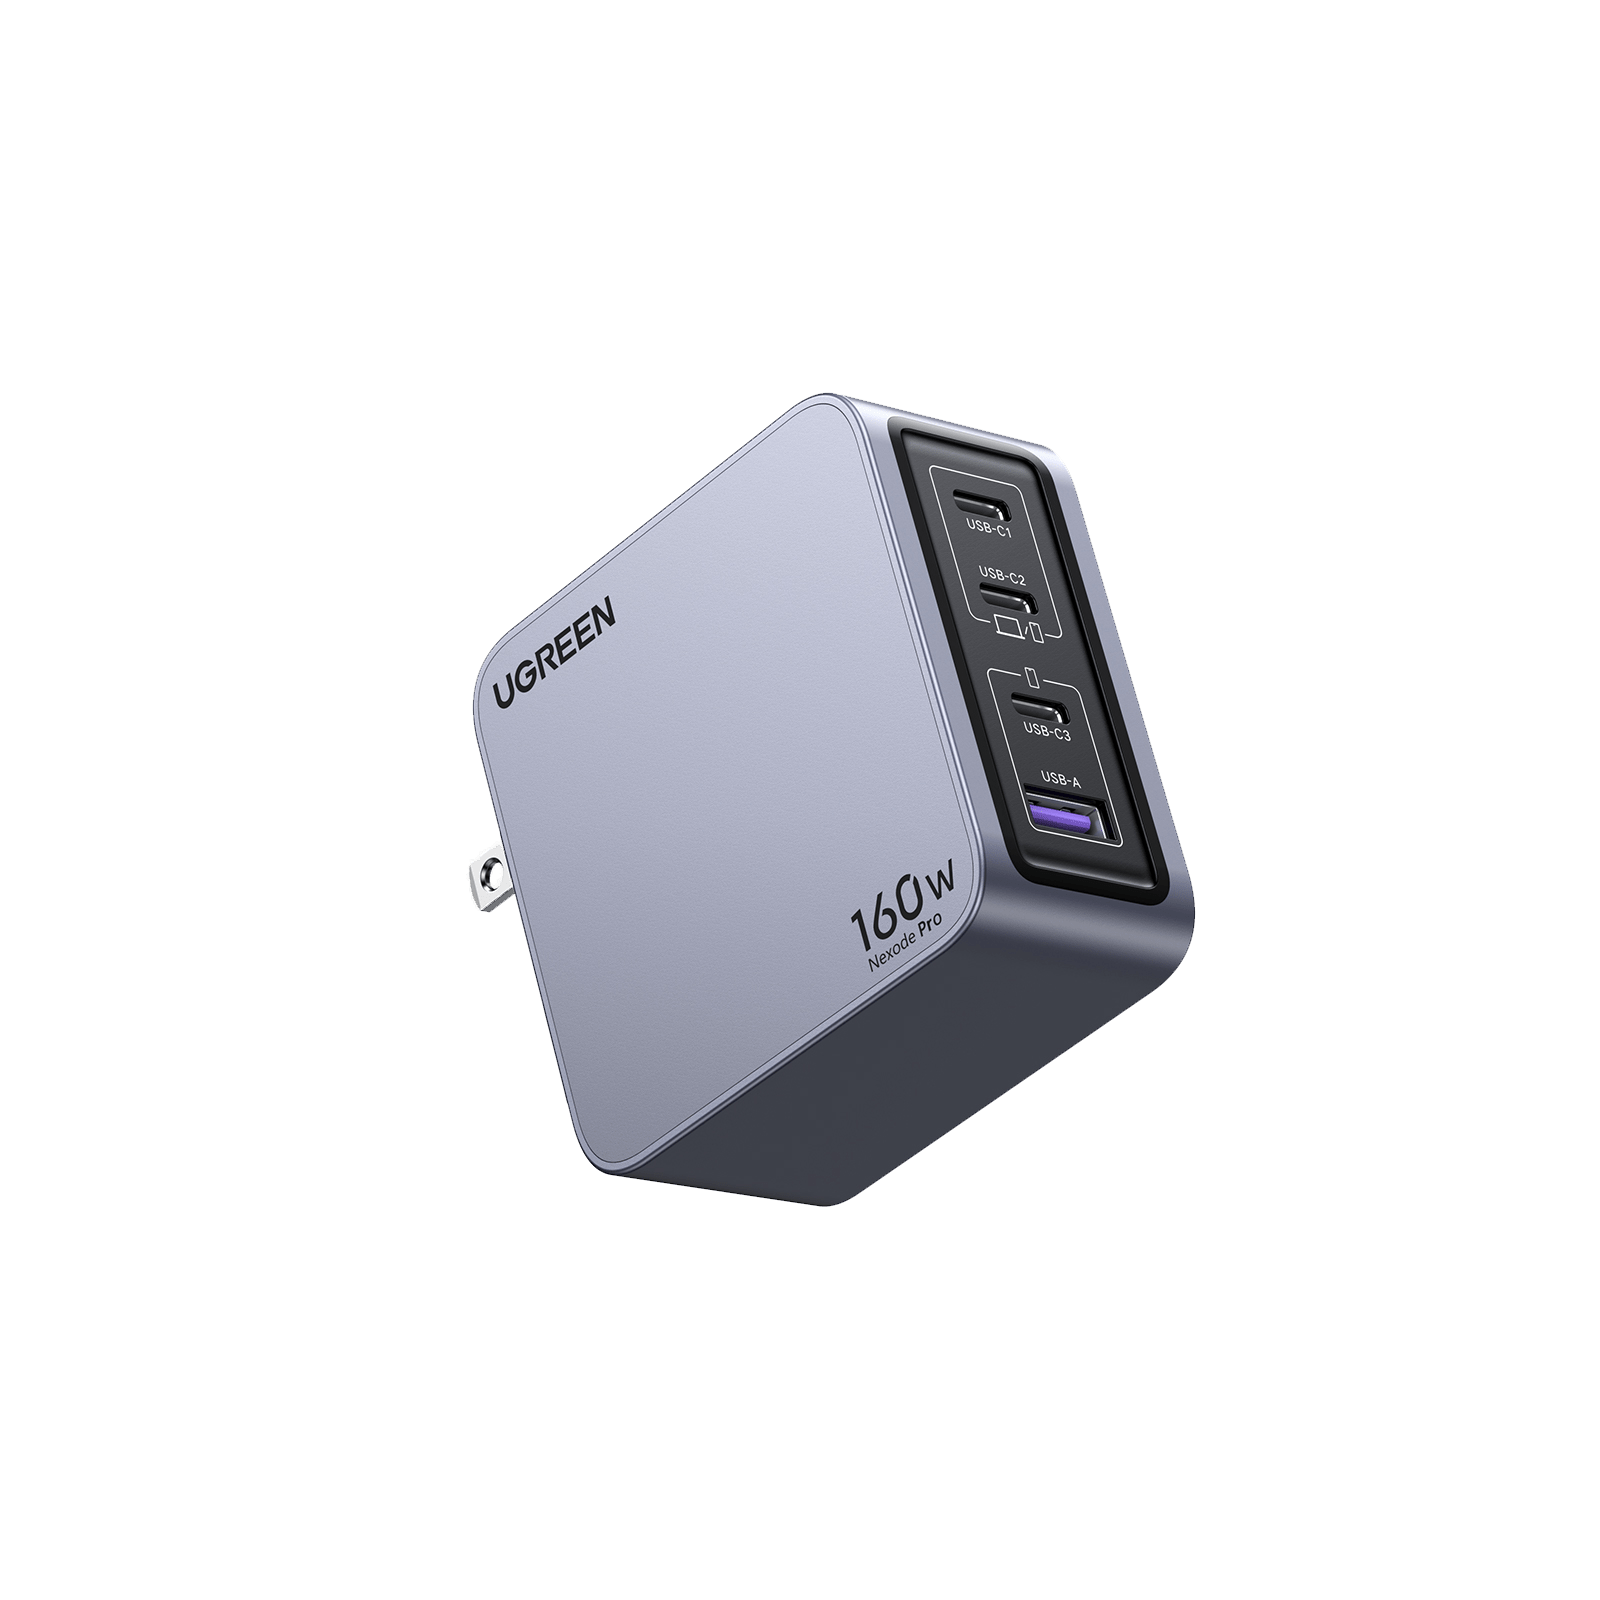 Ugreen Nexode Pro GaN 160W charger launched 